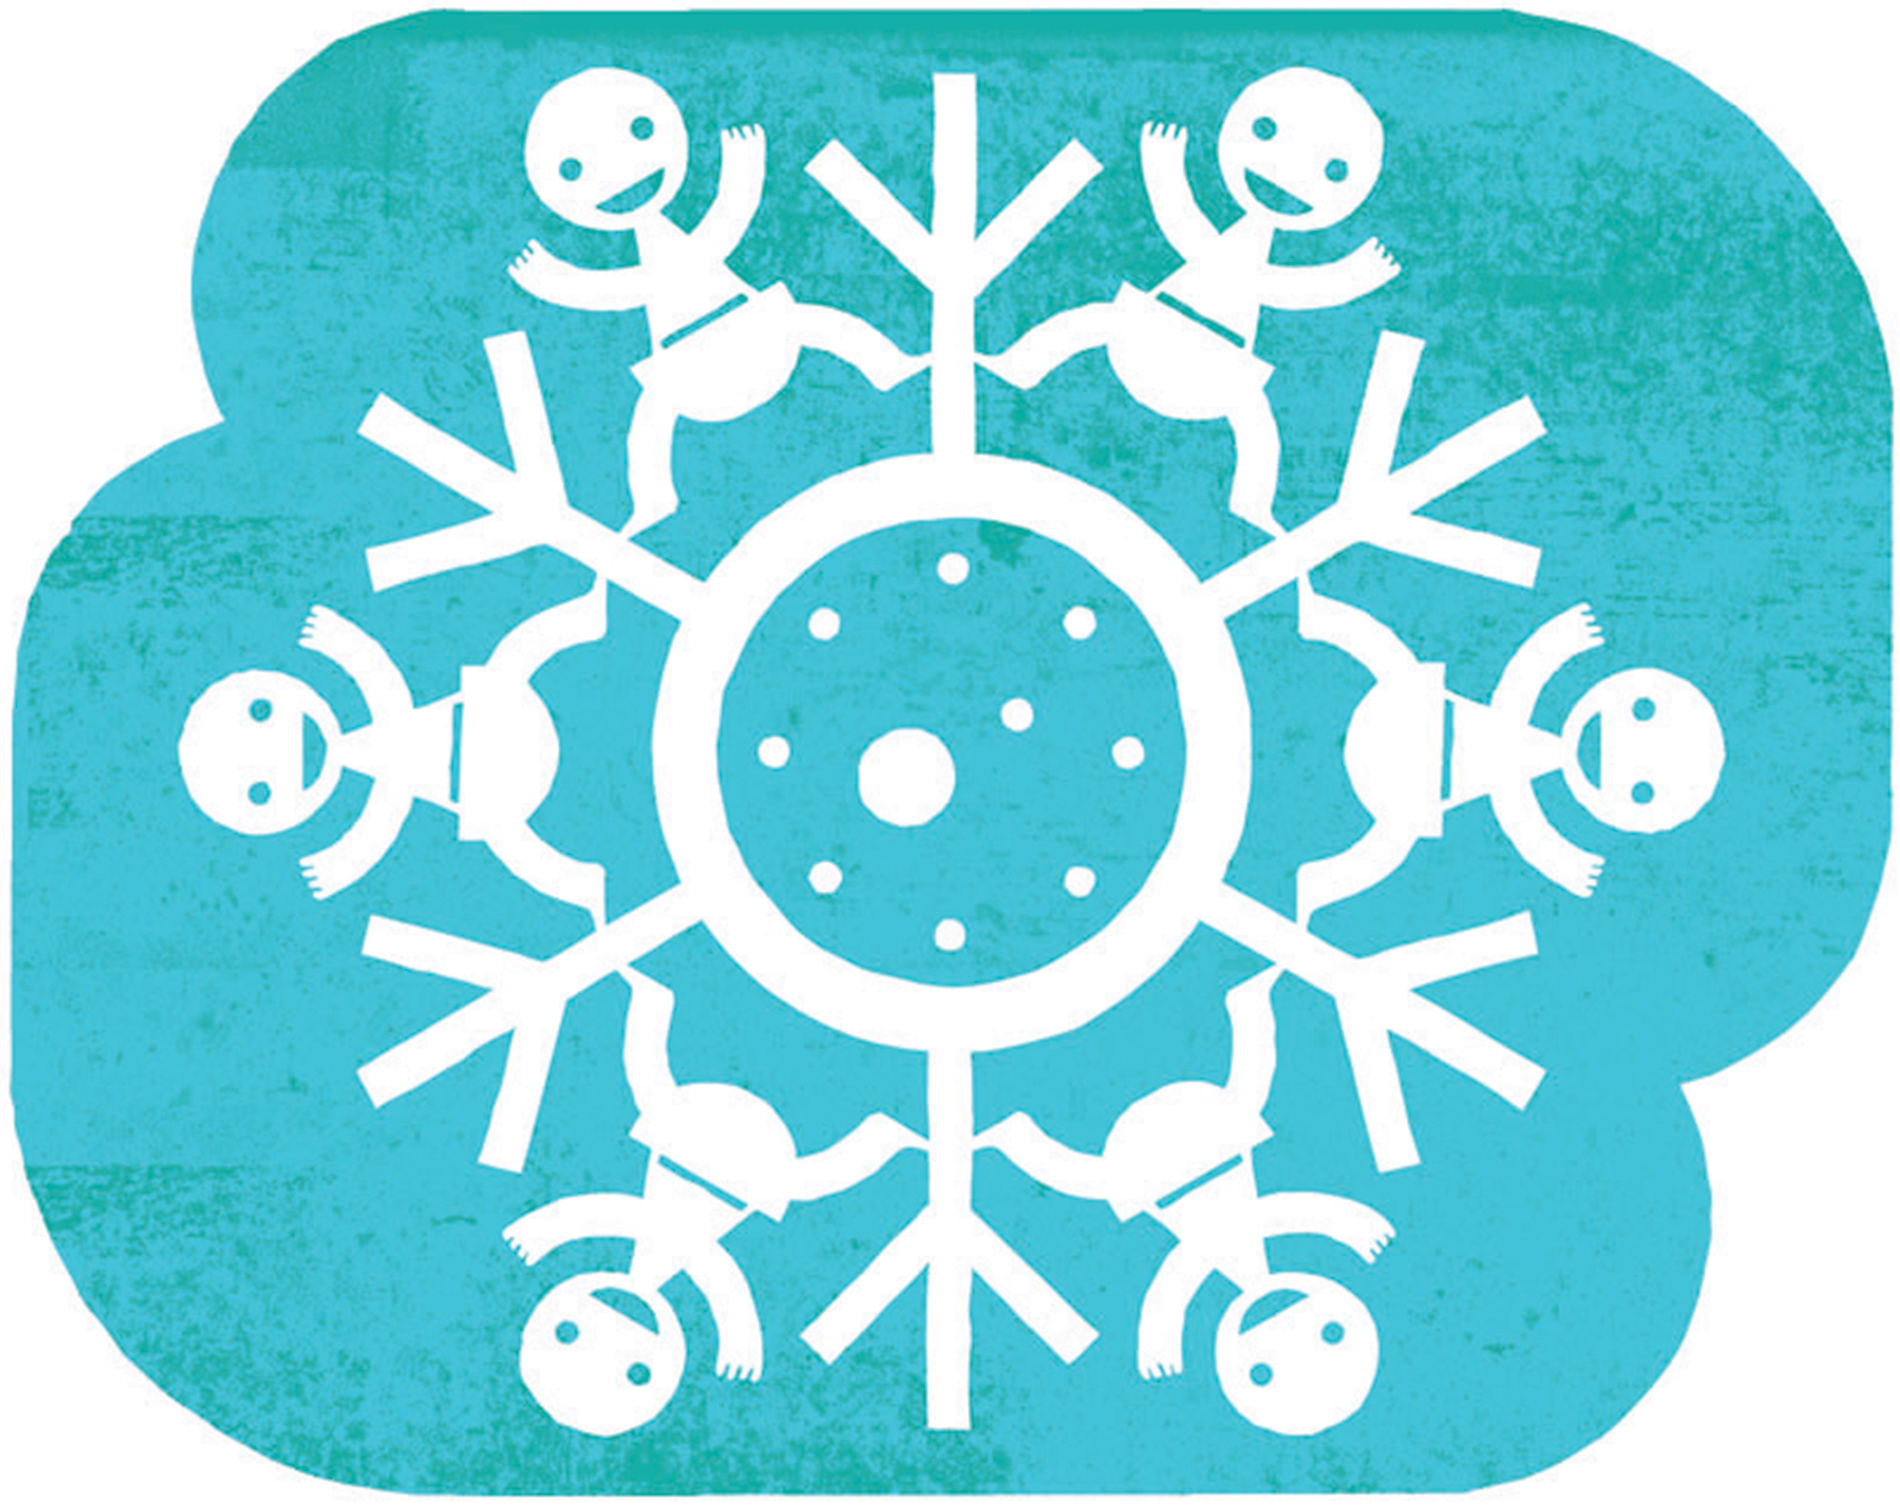 Illustration of baby-shaped snowflakes